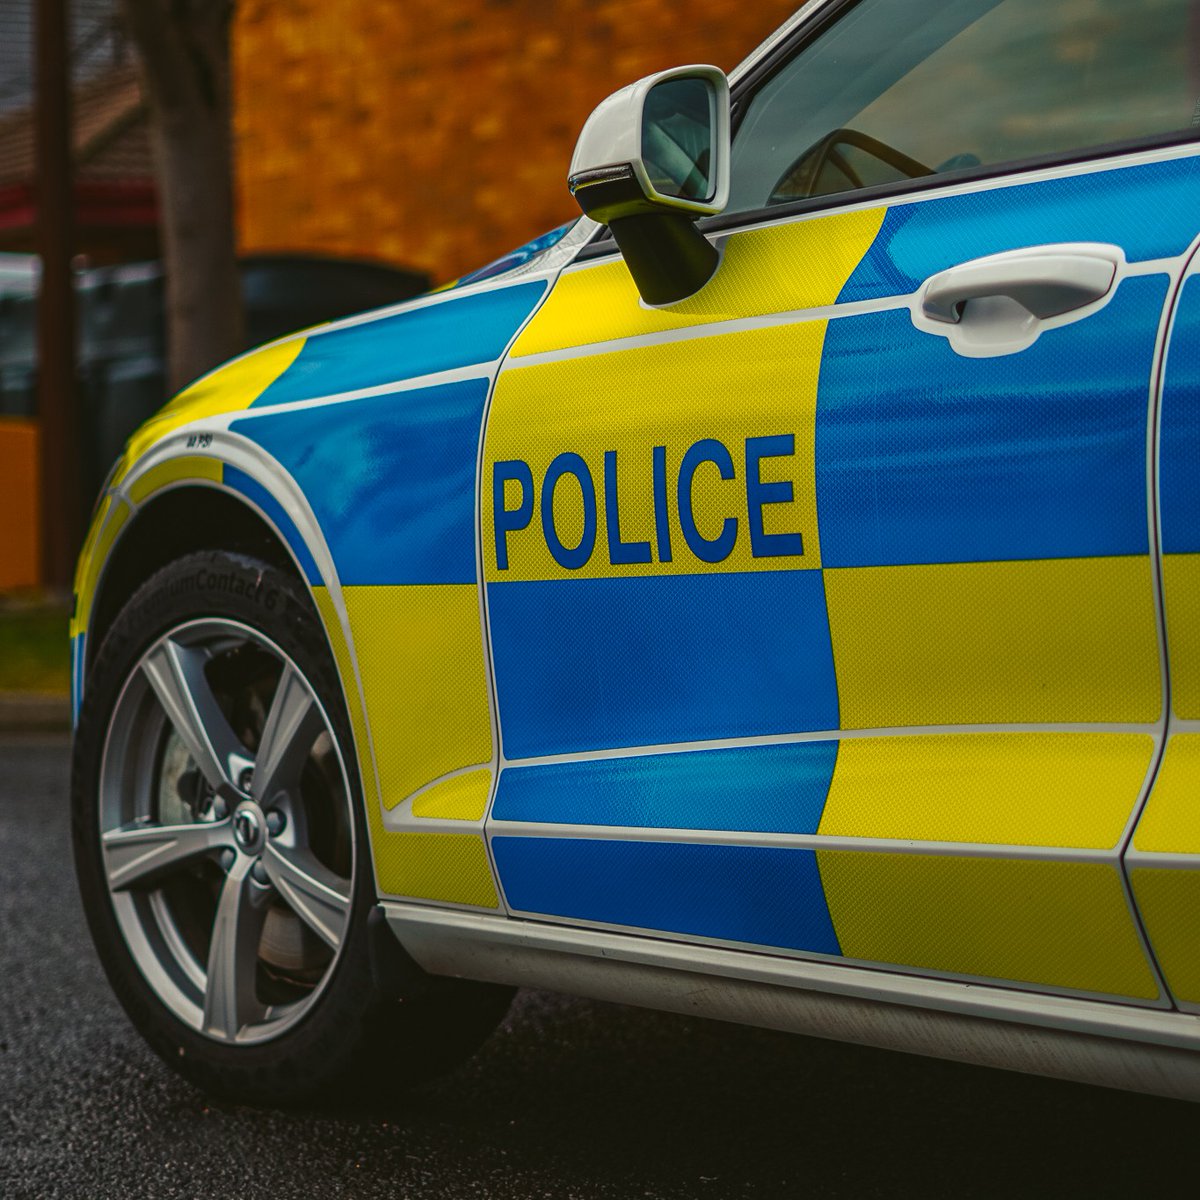 We're investigating a collision on Bensham Road in Gateshead on Wednesday which left a woman with serious injuries.

A white Citroën Relay minibus was travelling in an easterly direction when it struck a female pedestrian on the road at around 4pm, near to Barrington Place.

1/3